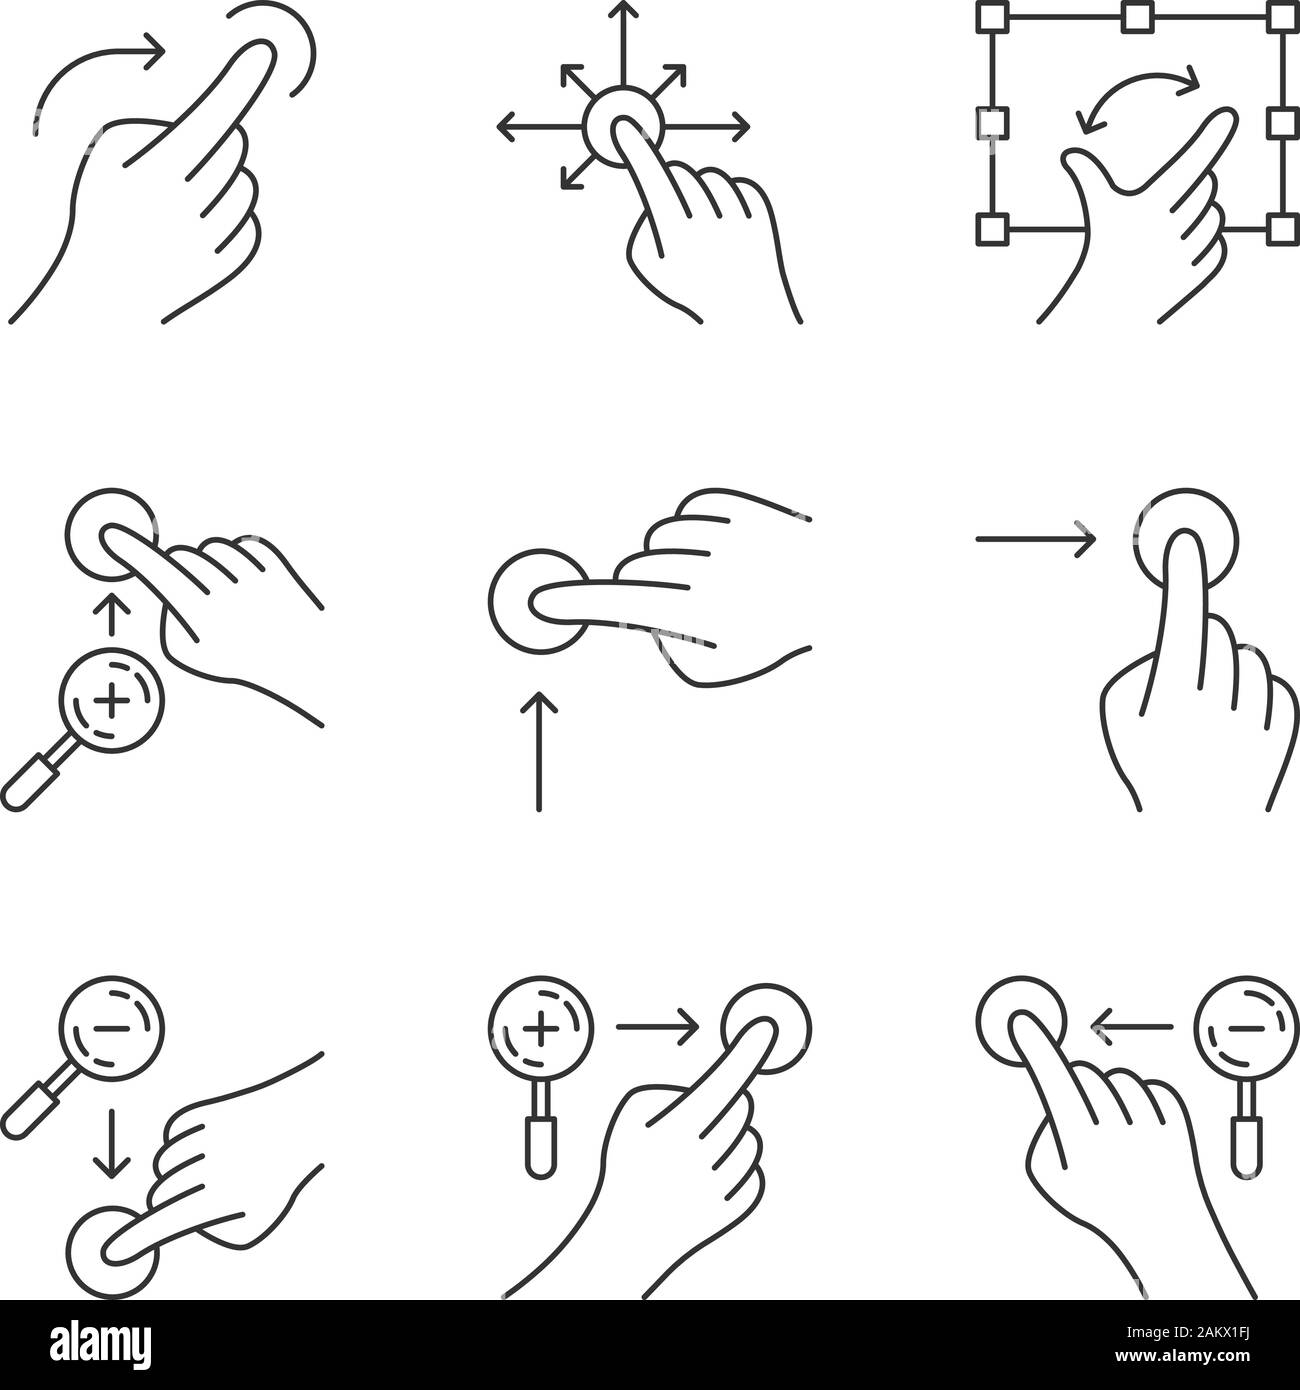 Touchscreen gestures linear icons set. Scroll up, scroll right. Zoom in vertical, zoom out horizontal. Drag finger all directions. Thin contour symbol Stock Vector